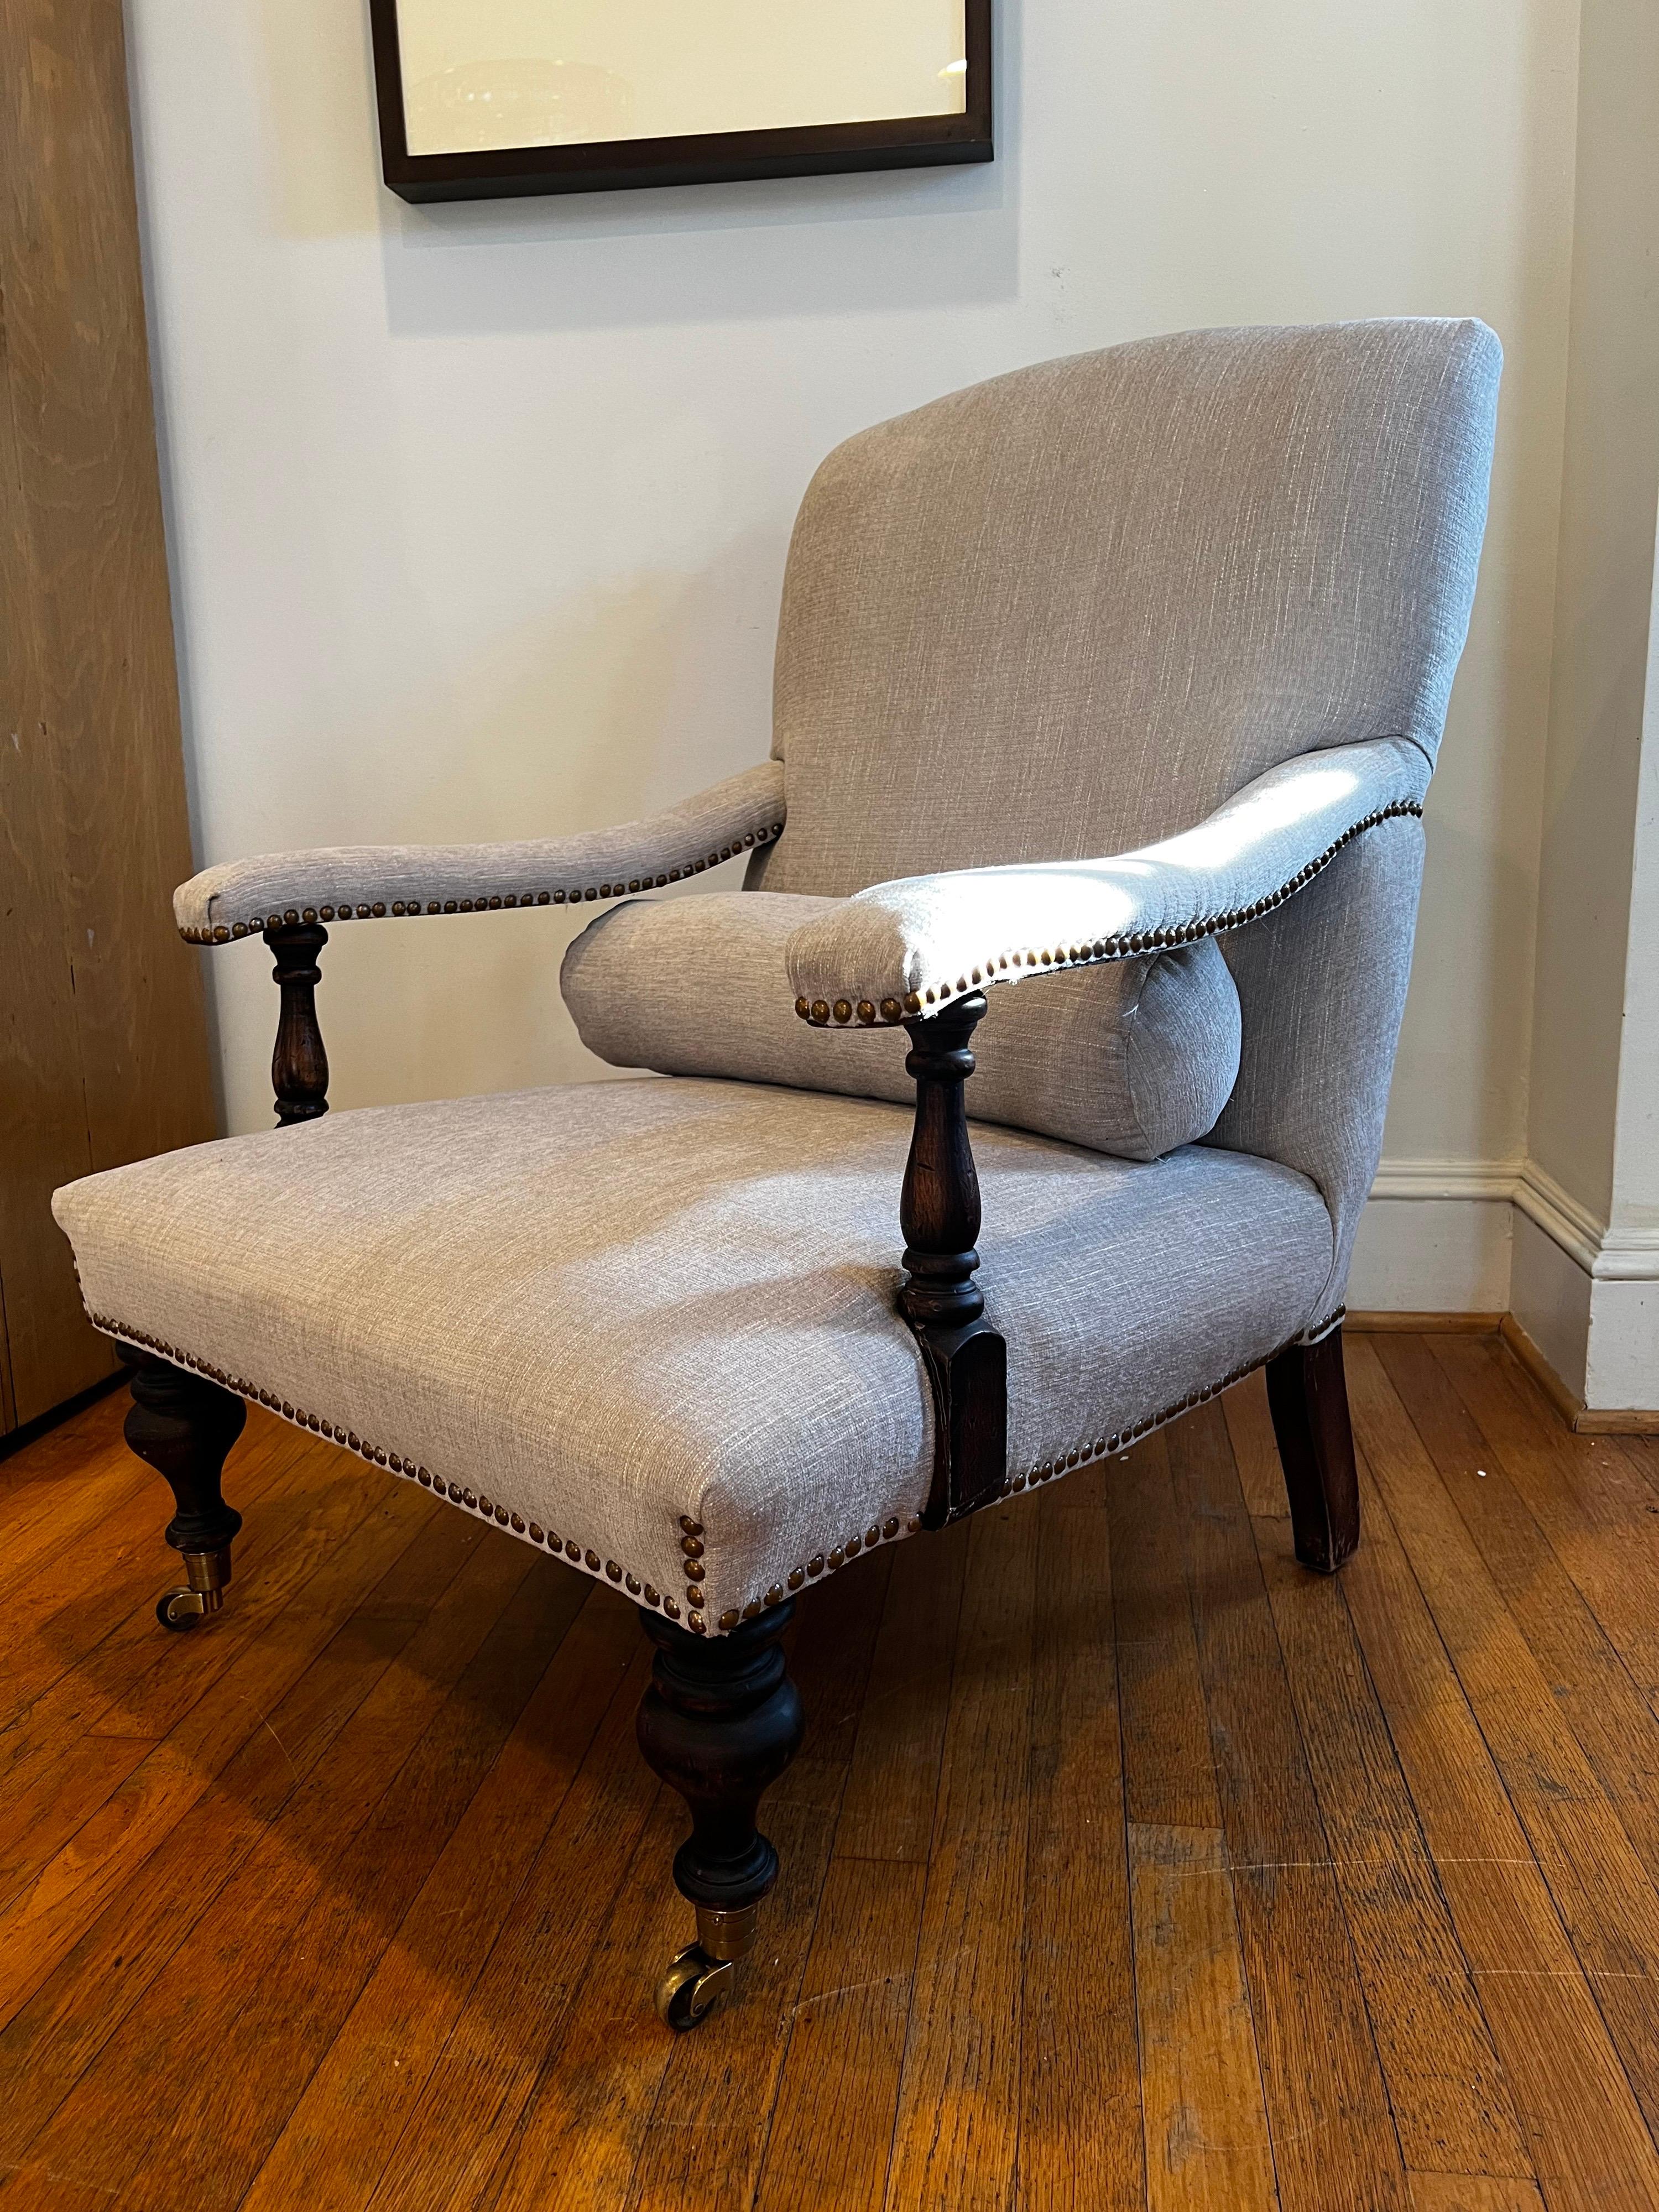 Beautiful Library/Reading armchair newly reupholstered in a light green/gray chenille fabric.
Handworked nailhead trim and brass castors on front two turned legs.

This was a custom made chair back in the early 90's and was recently